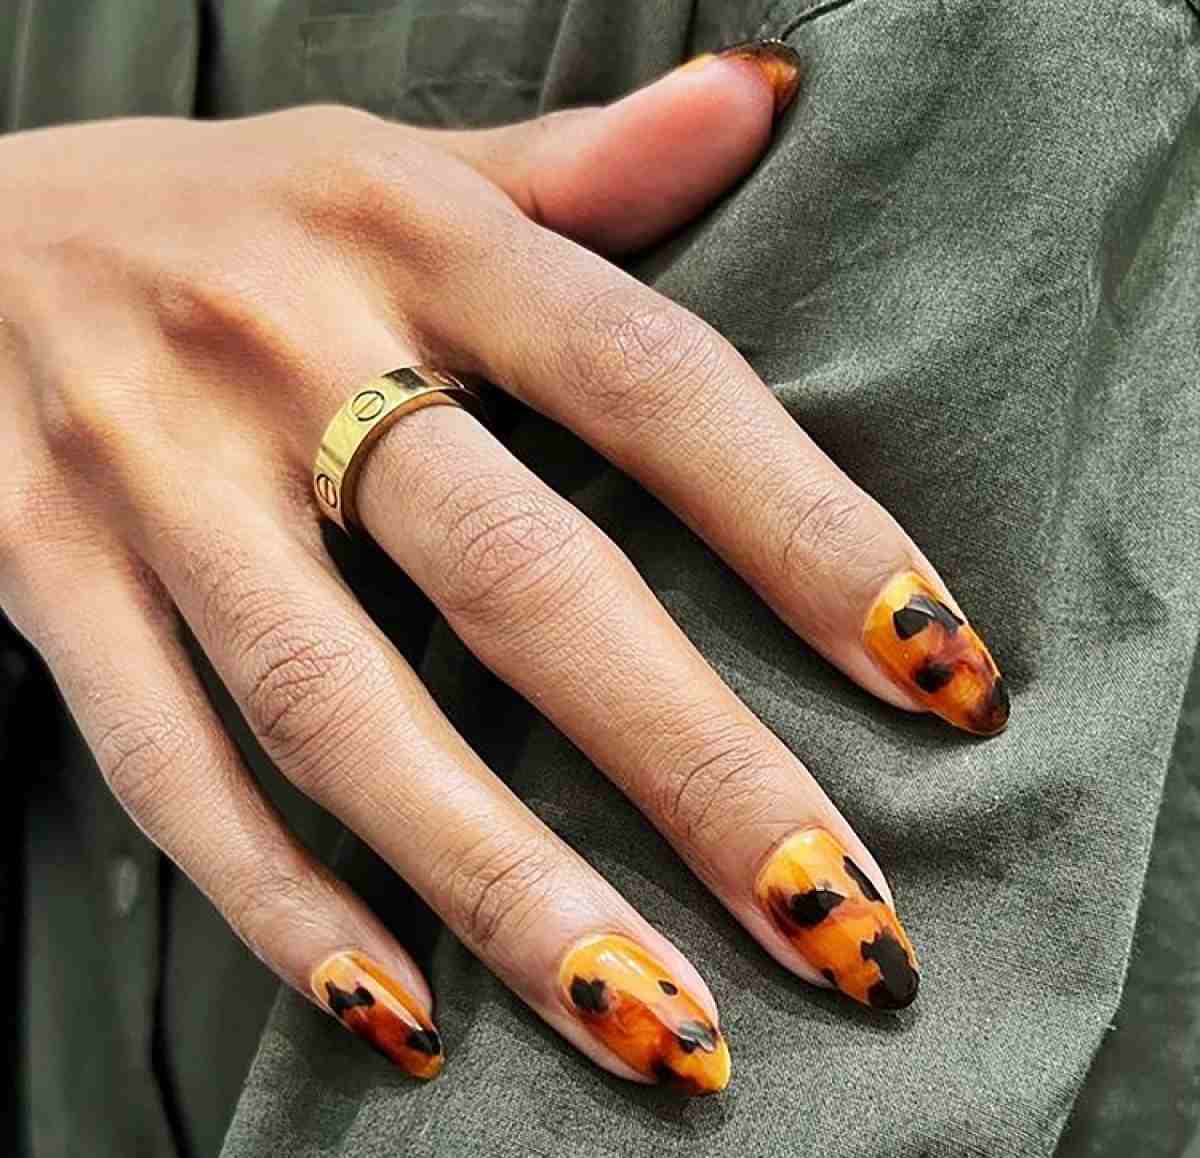 Trendy nail art ideas: how to wear animal print manicure?